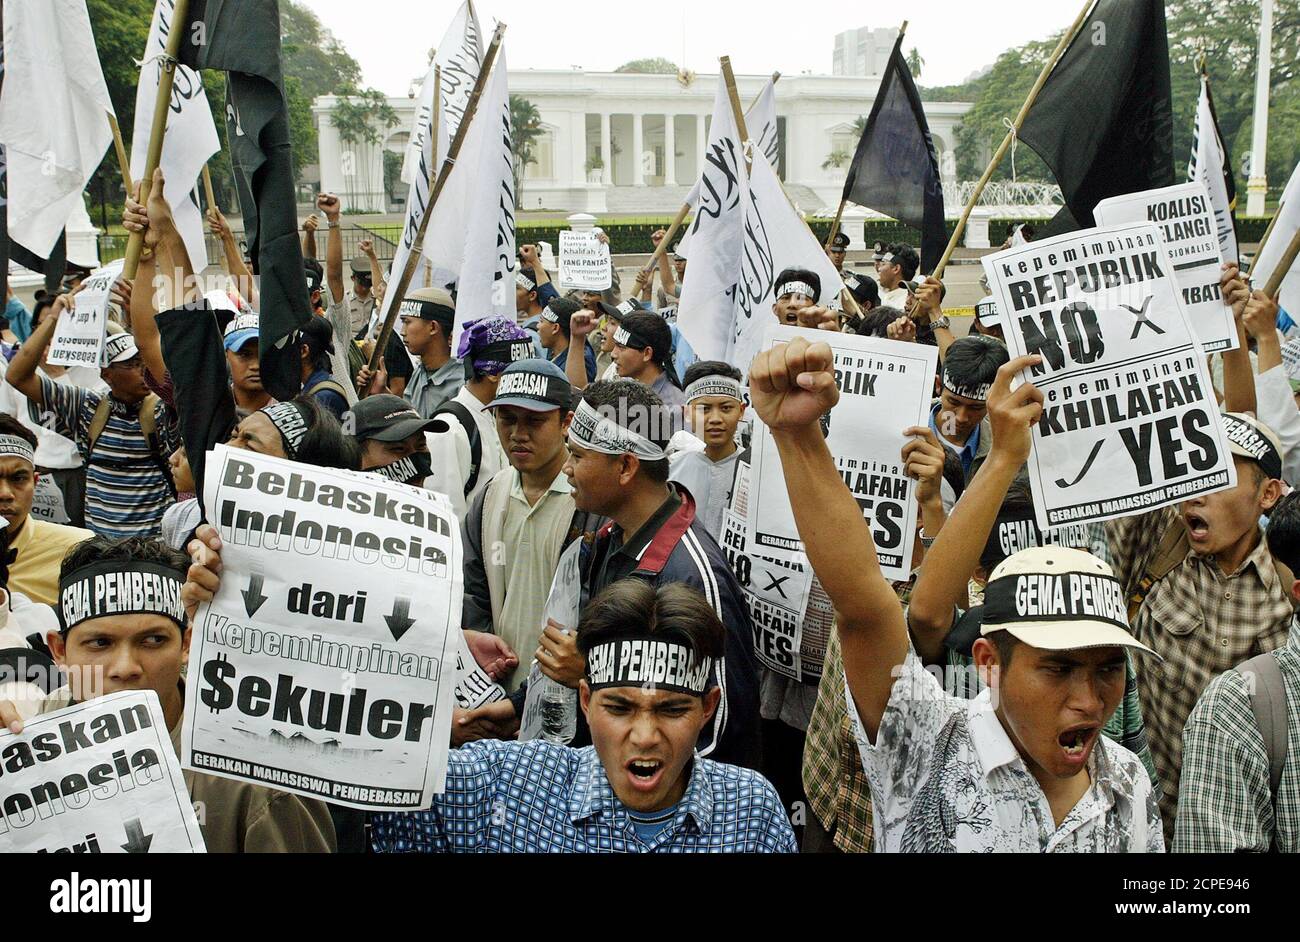 Indonesian Muslims protest outside the presidential palace in Jakarta August 30, 2004. Hundreds of Muslim protesters rallied in Jakarta calling for a more Islamic government. Indonesia, the world's most populous Muslim nation, will hold the final round of their first direct presidential elections on September 20. REUTERS/Darren Whiteside  dw Stock Photo